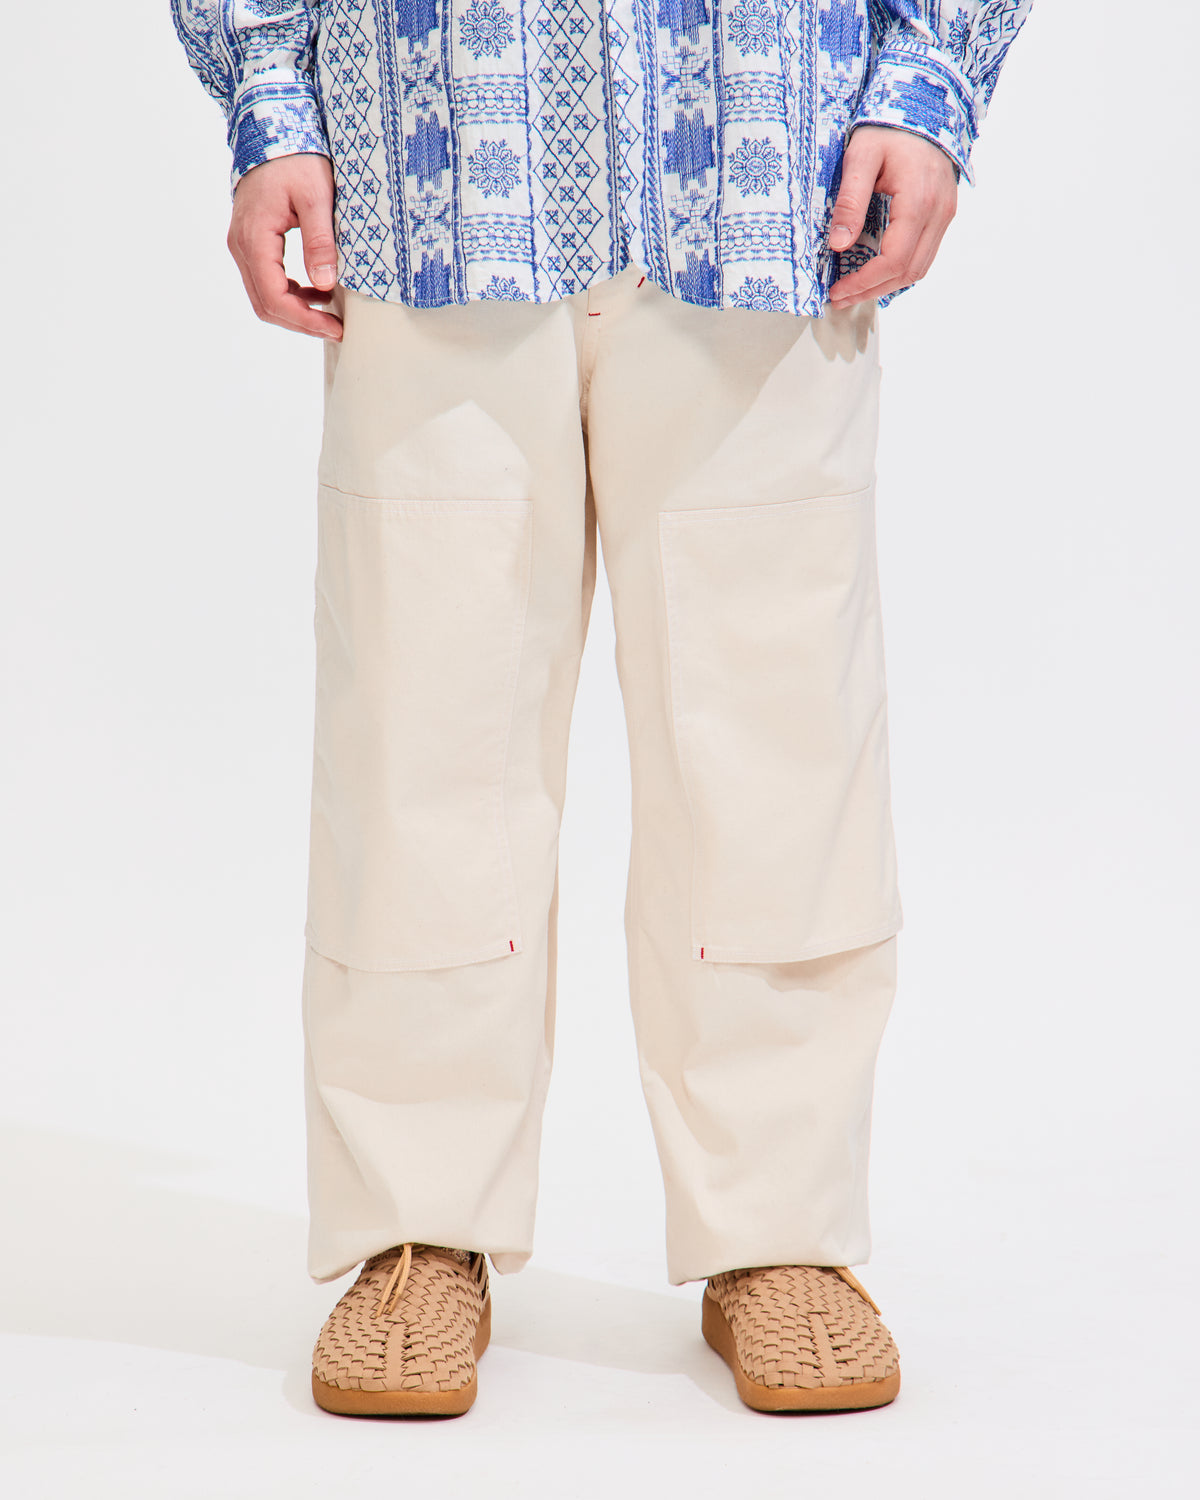 Painter Pant in Natural Chino Twill